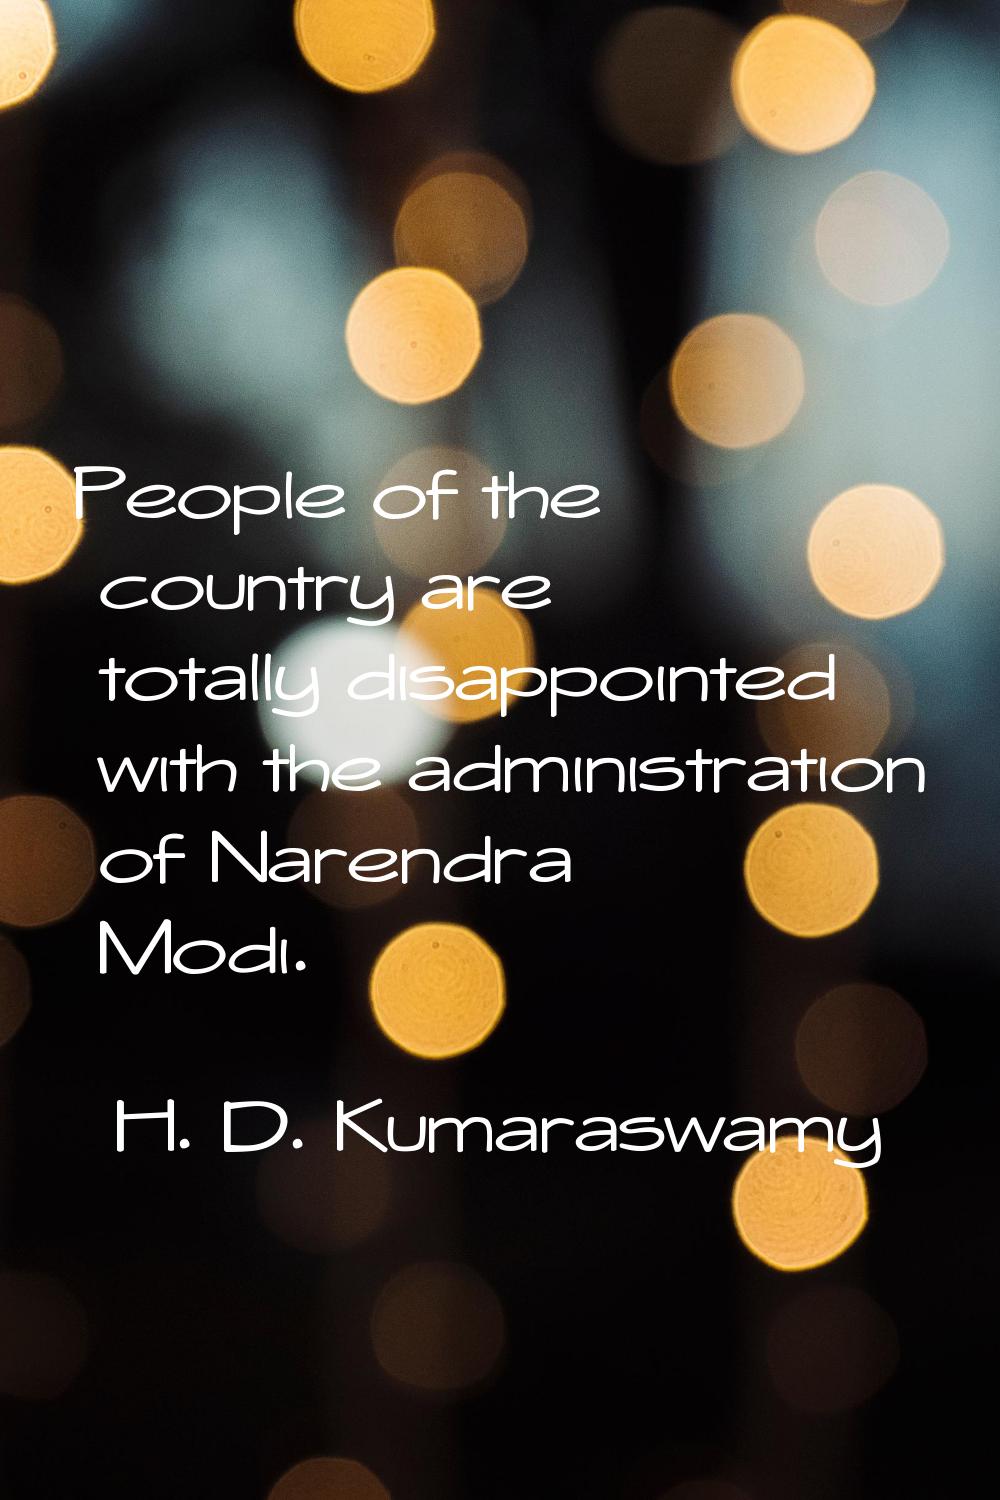 People of the country are totally disappointed with the administration of Narendra Modi.